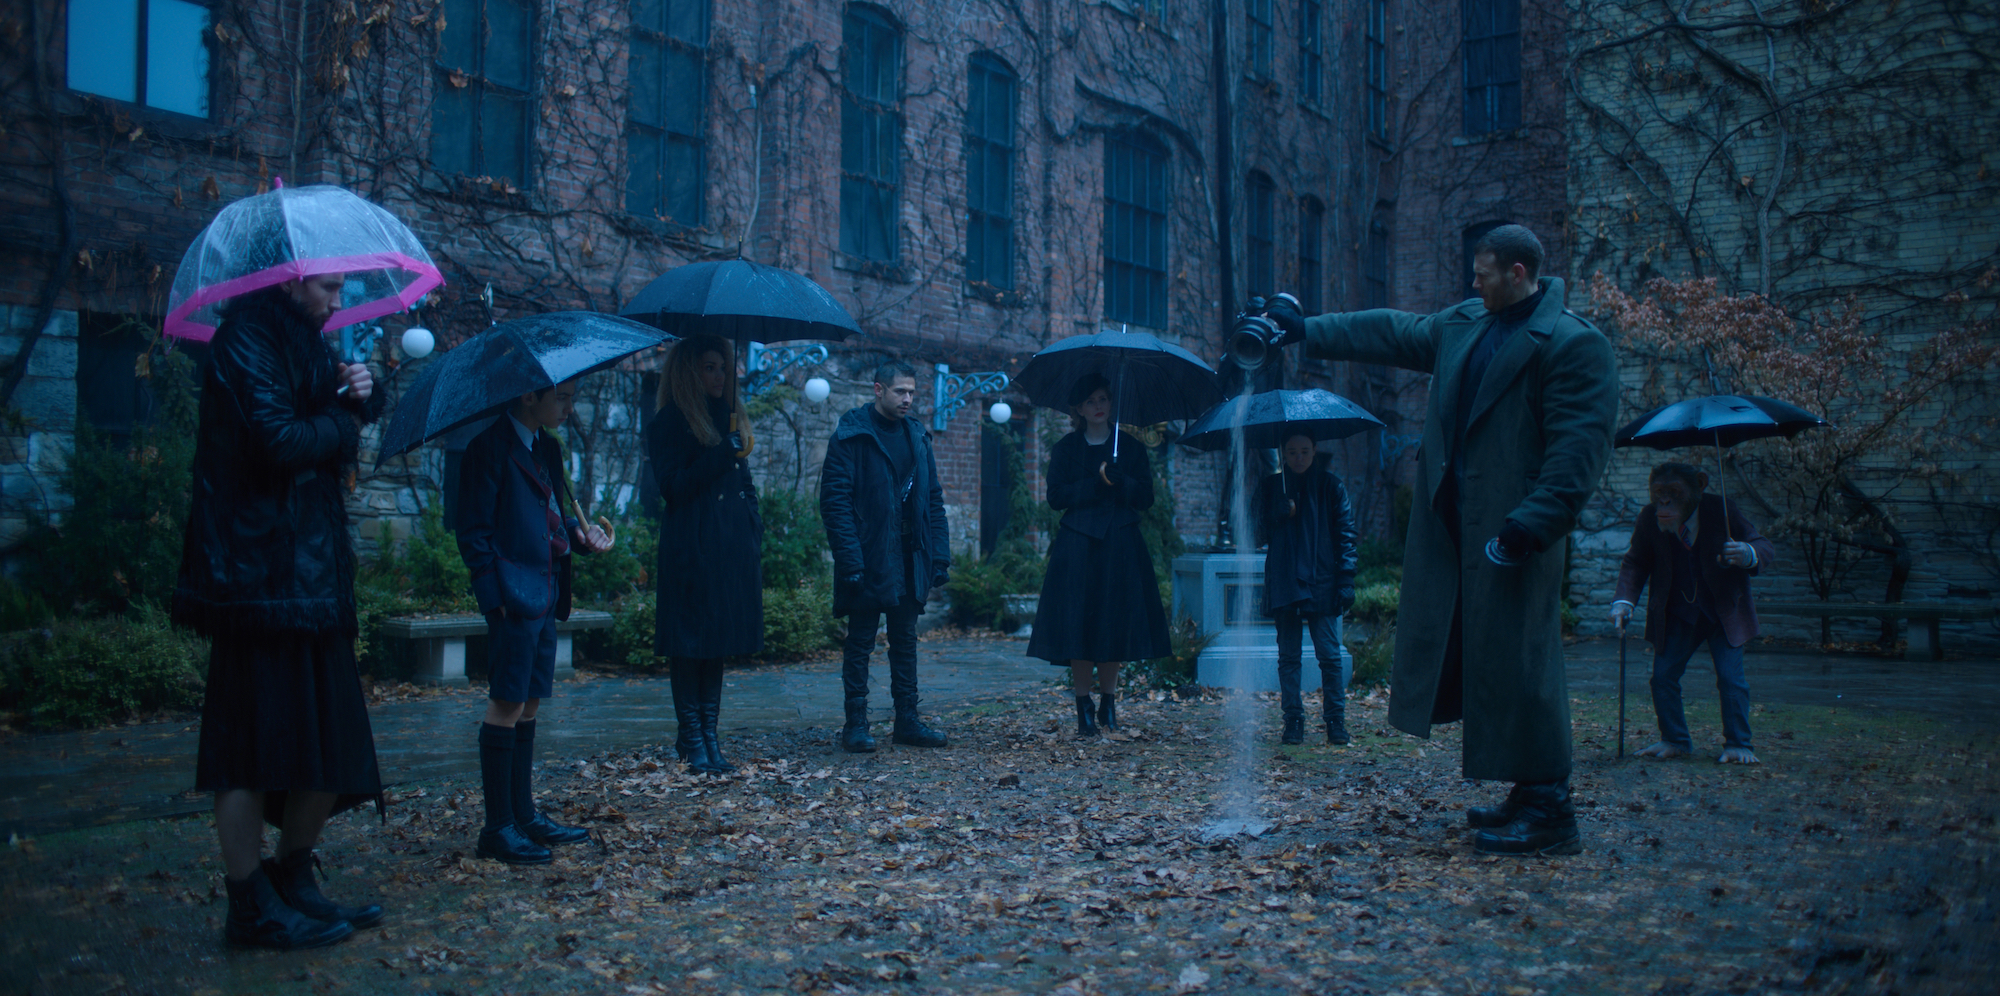 Members of The Umbrella Academy gather for their father's funeral in a production still from 'The Umbrella Academy' Season 1.